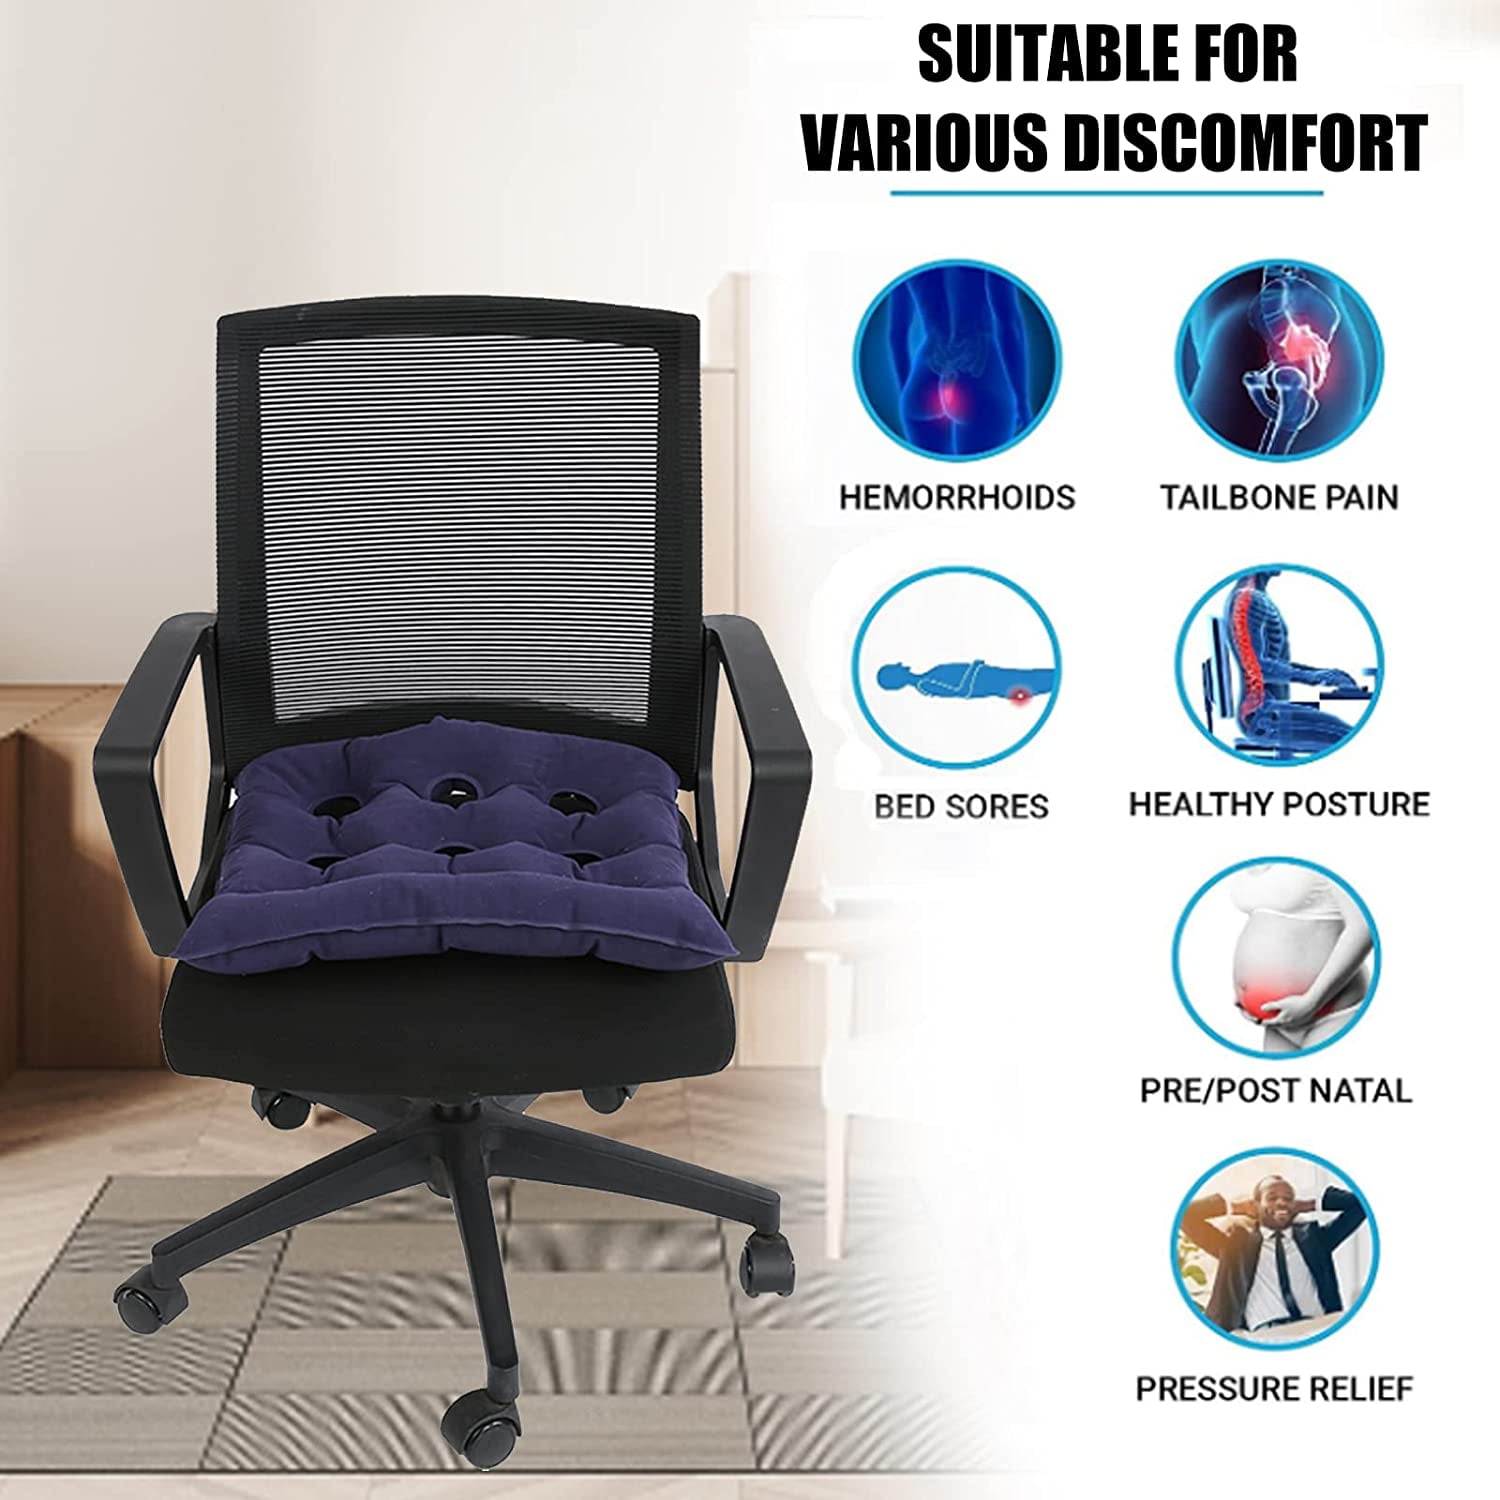  EverRelief Inflatable Seat Cushion - Travel Seat Cushion for  Wheelchair, Airplane, Car, Office, Stadium Seating- Adjustable Air Pressure  Pillow for Sitting Pain Free : Health & Household